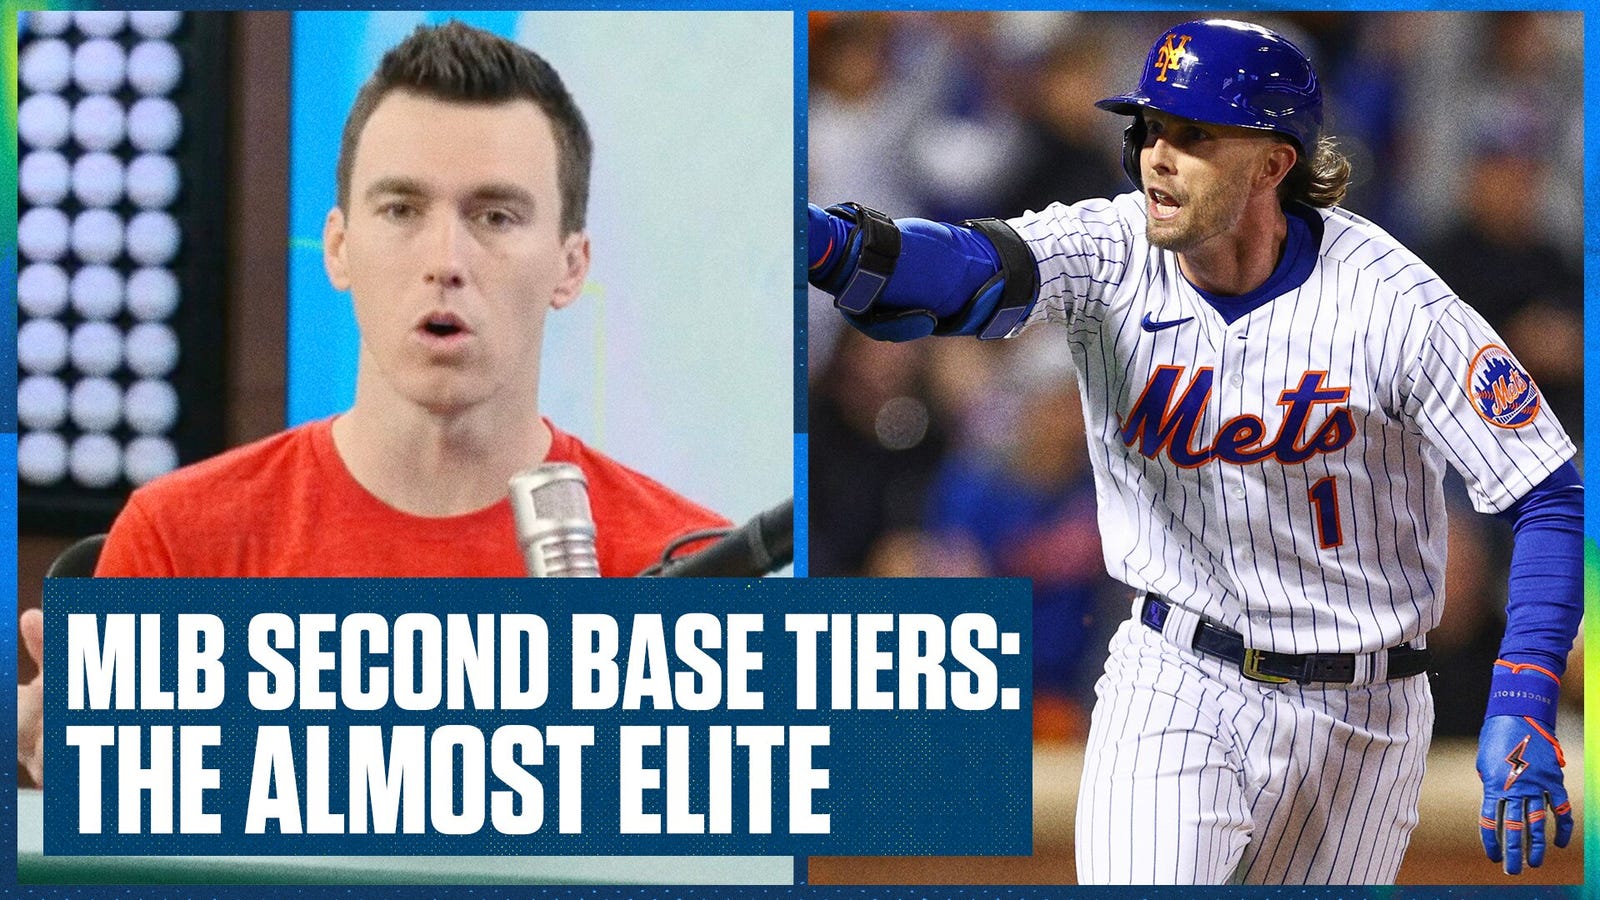 MLB Second Base Tiers: ‘The Almost Elite’ 